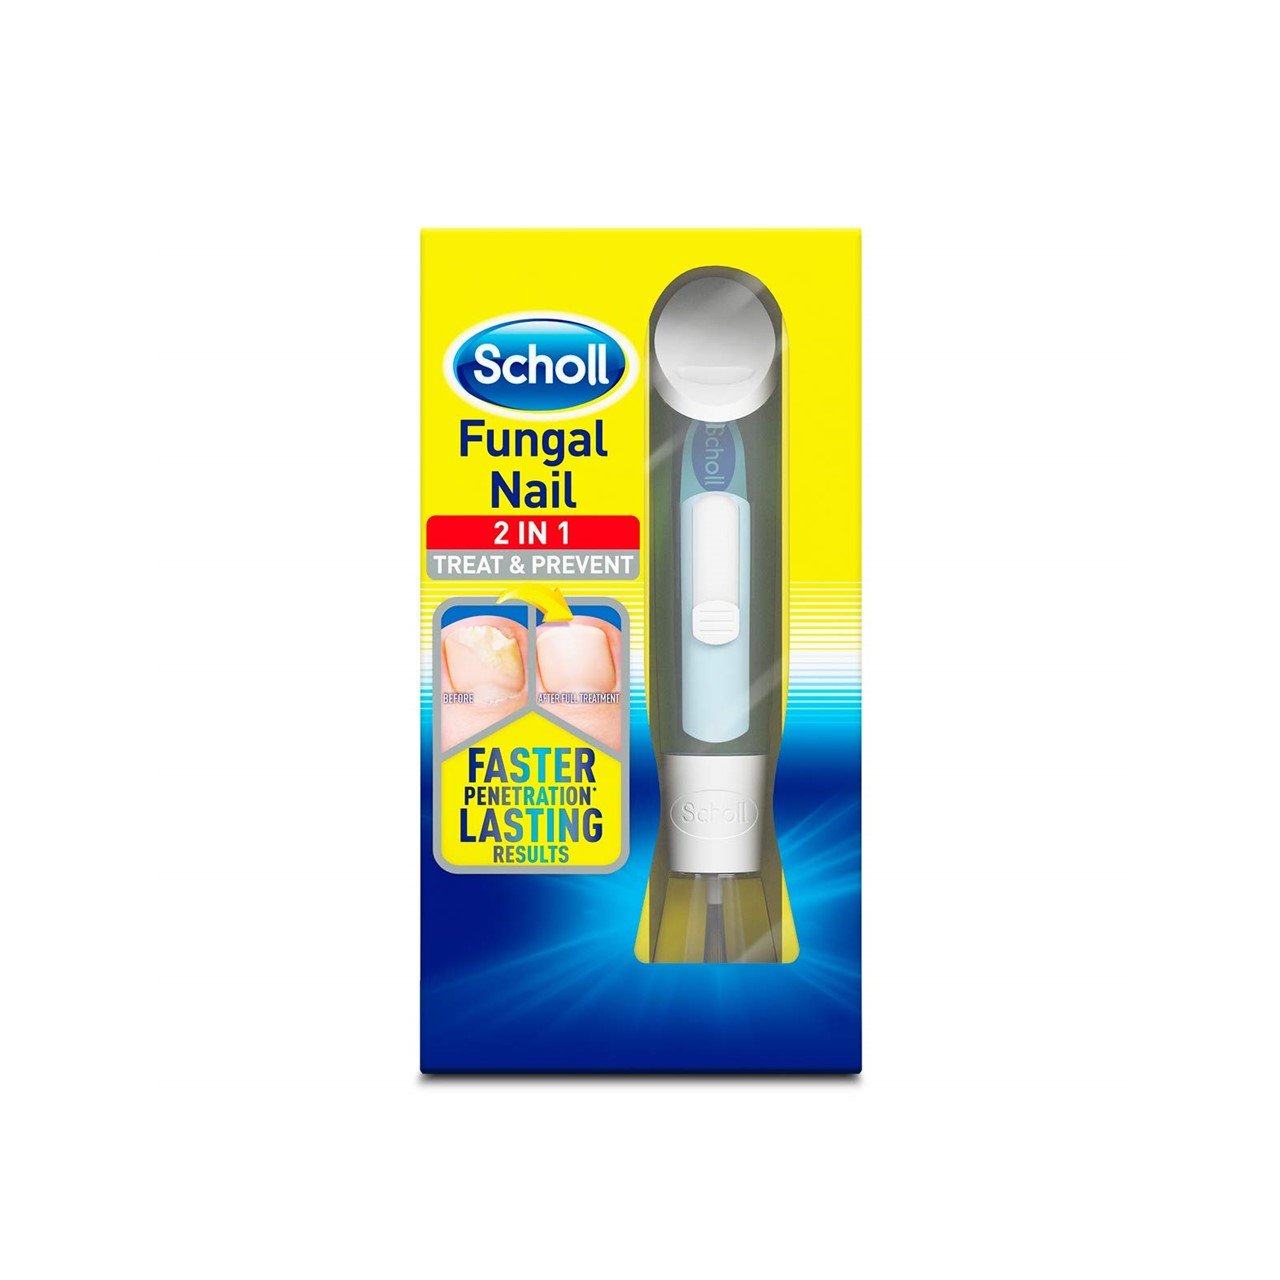 Dr. Scholl's Manicure & Pedicure Tools & Kits for sale